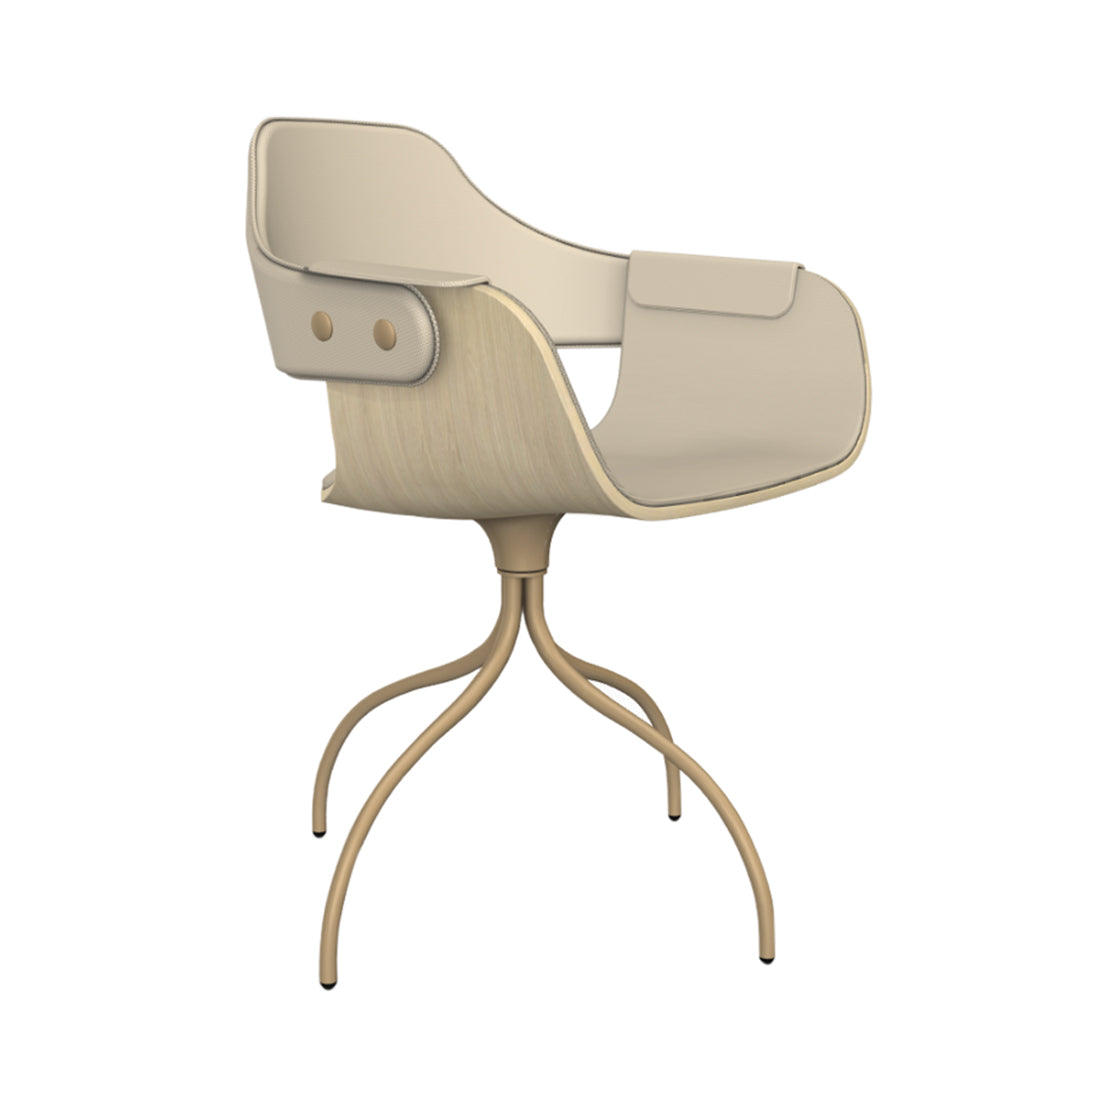 Showtime Nude Chair with Swivel Base: Full Upholstered + Natural Ash + Beige